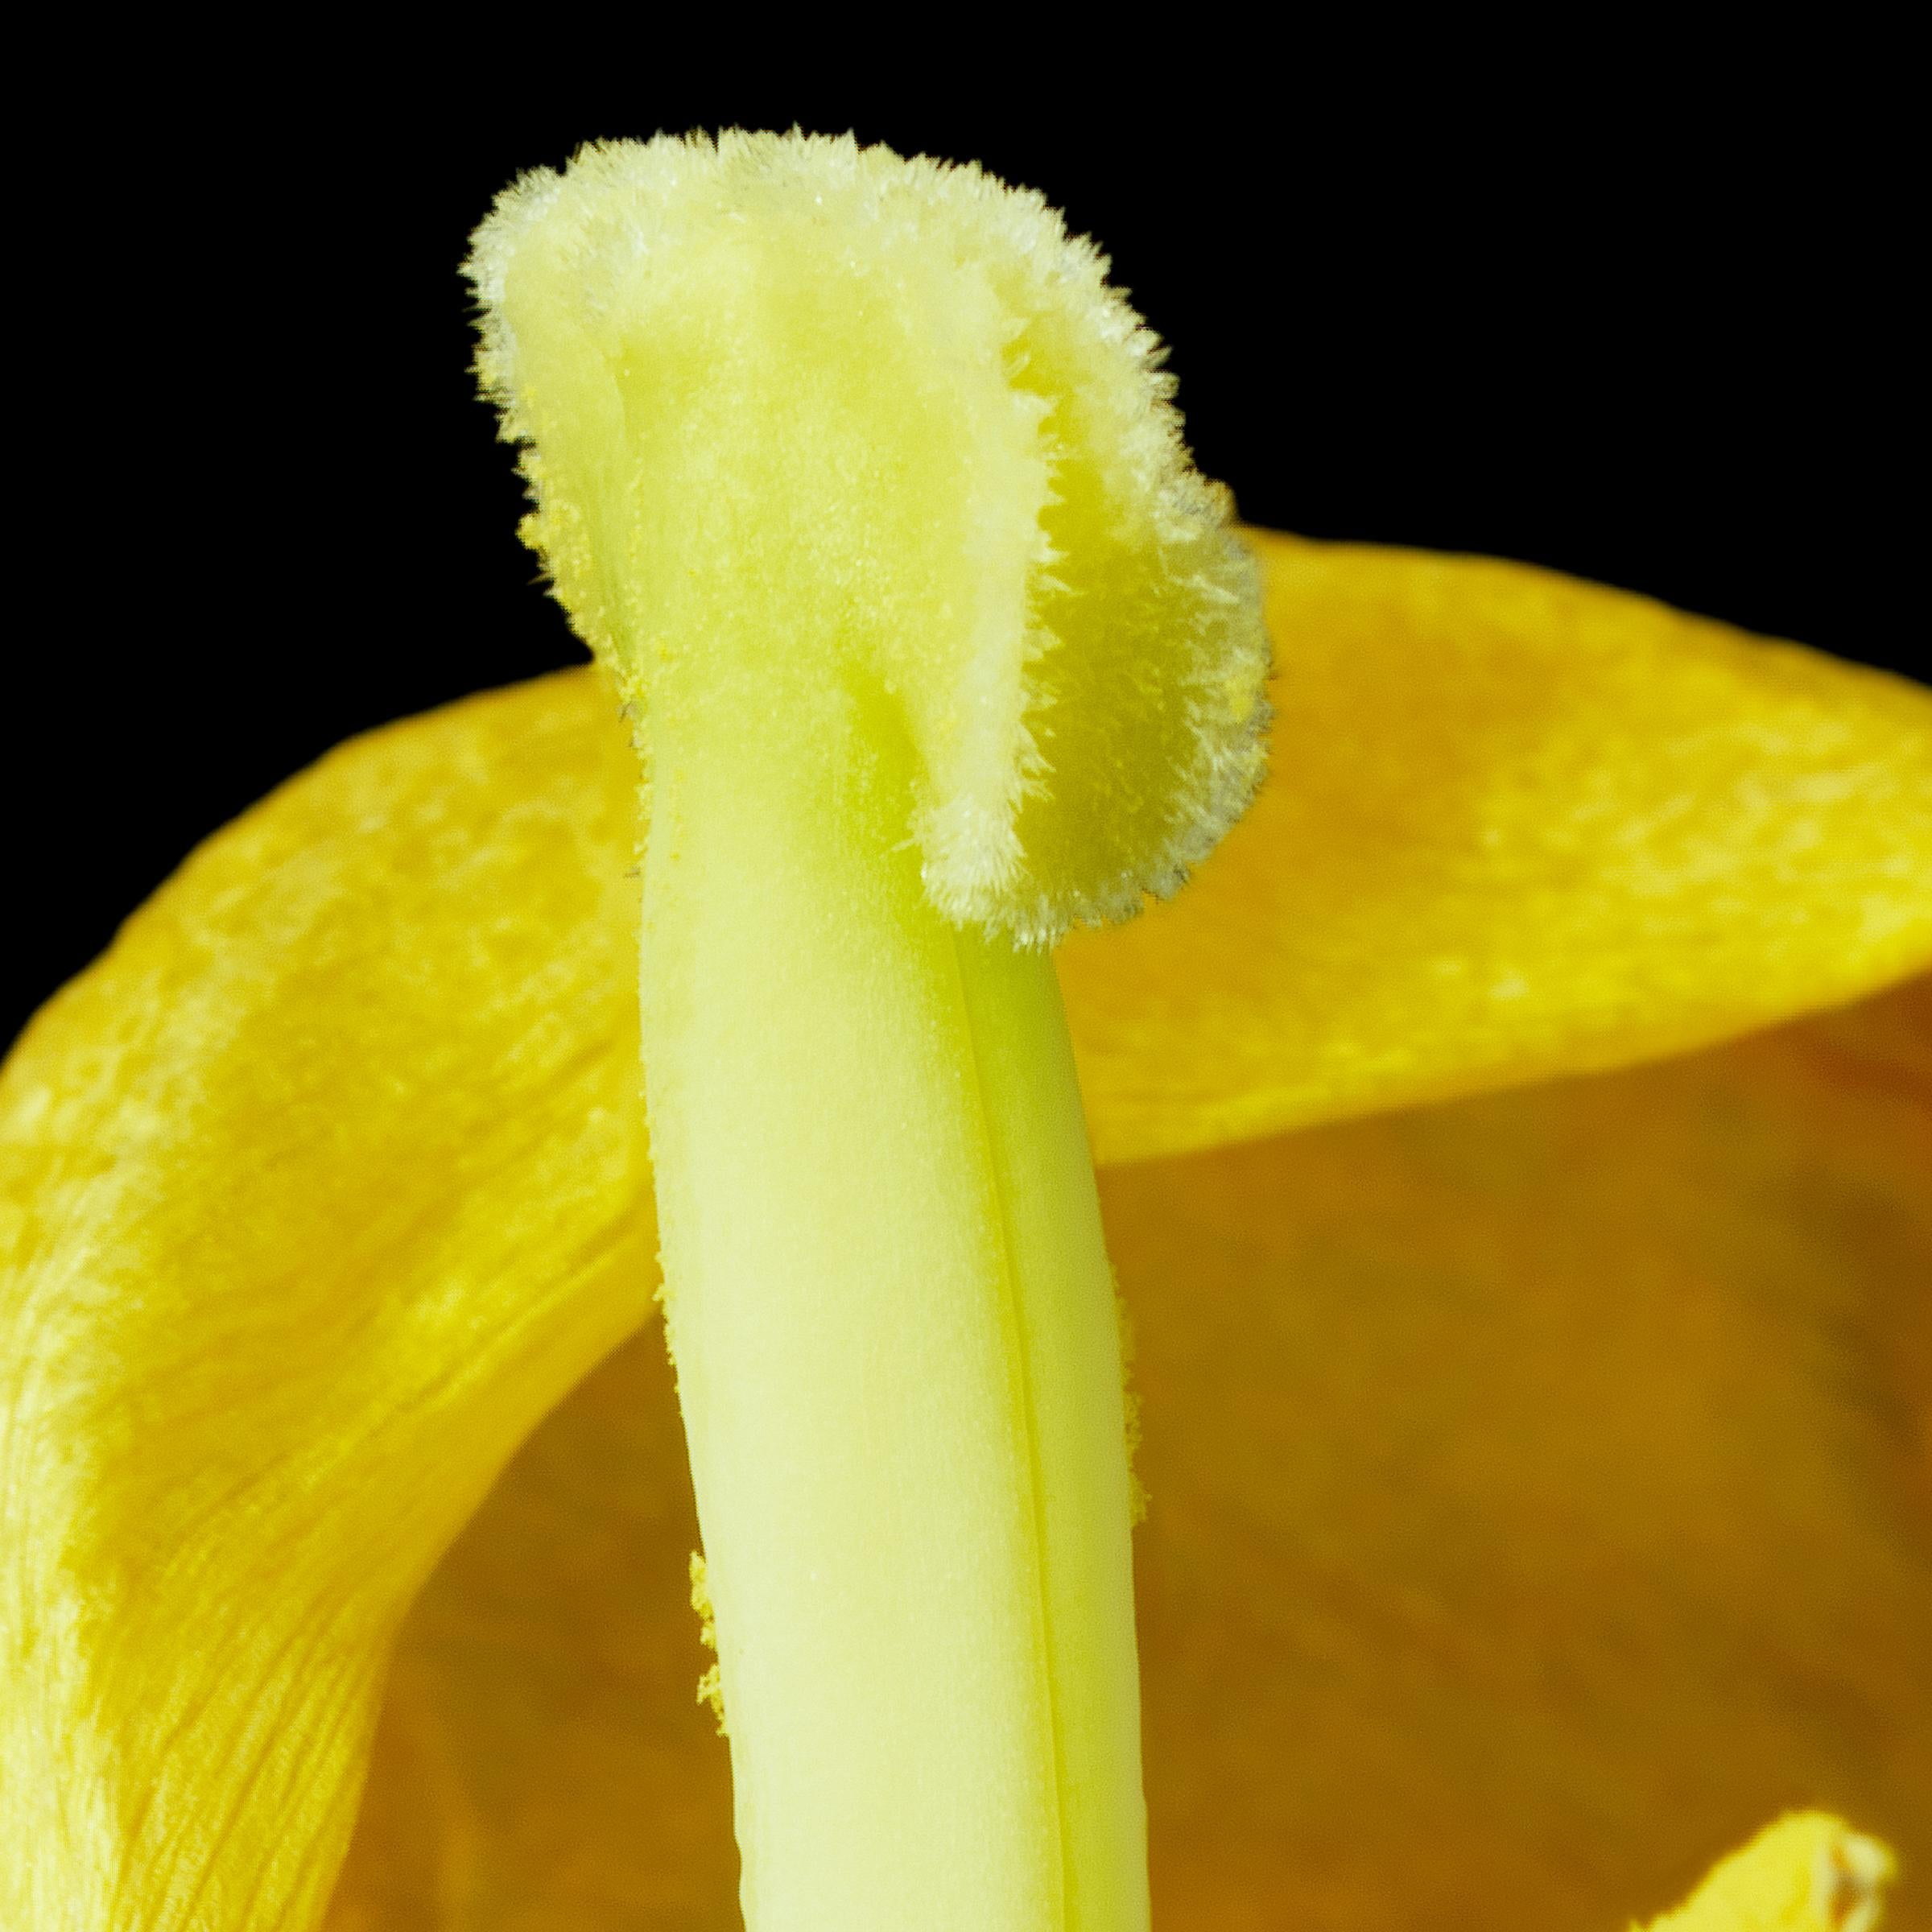 Yellow Tulip 19, archival pigment print photograph, printed on Fine Art paper by Tim Nighswander.  It is 32x24, framed in a white frame to 40x32 with a UV glass  It is a limited edition of 15, signed and numbered.  The fine detail makes this